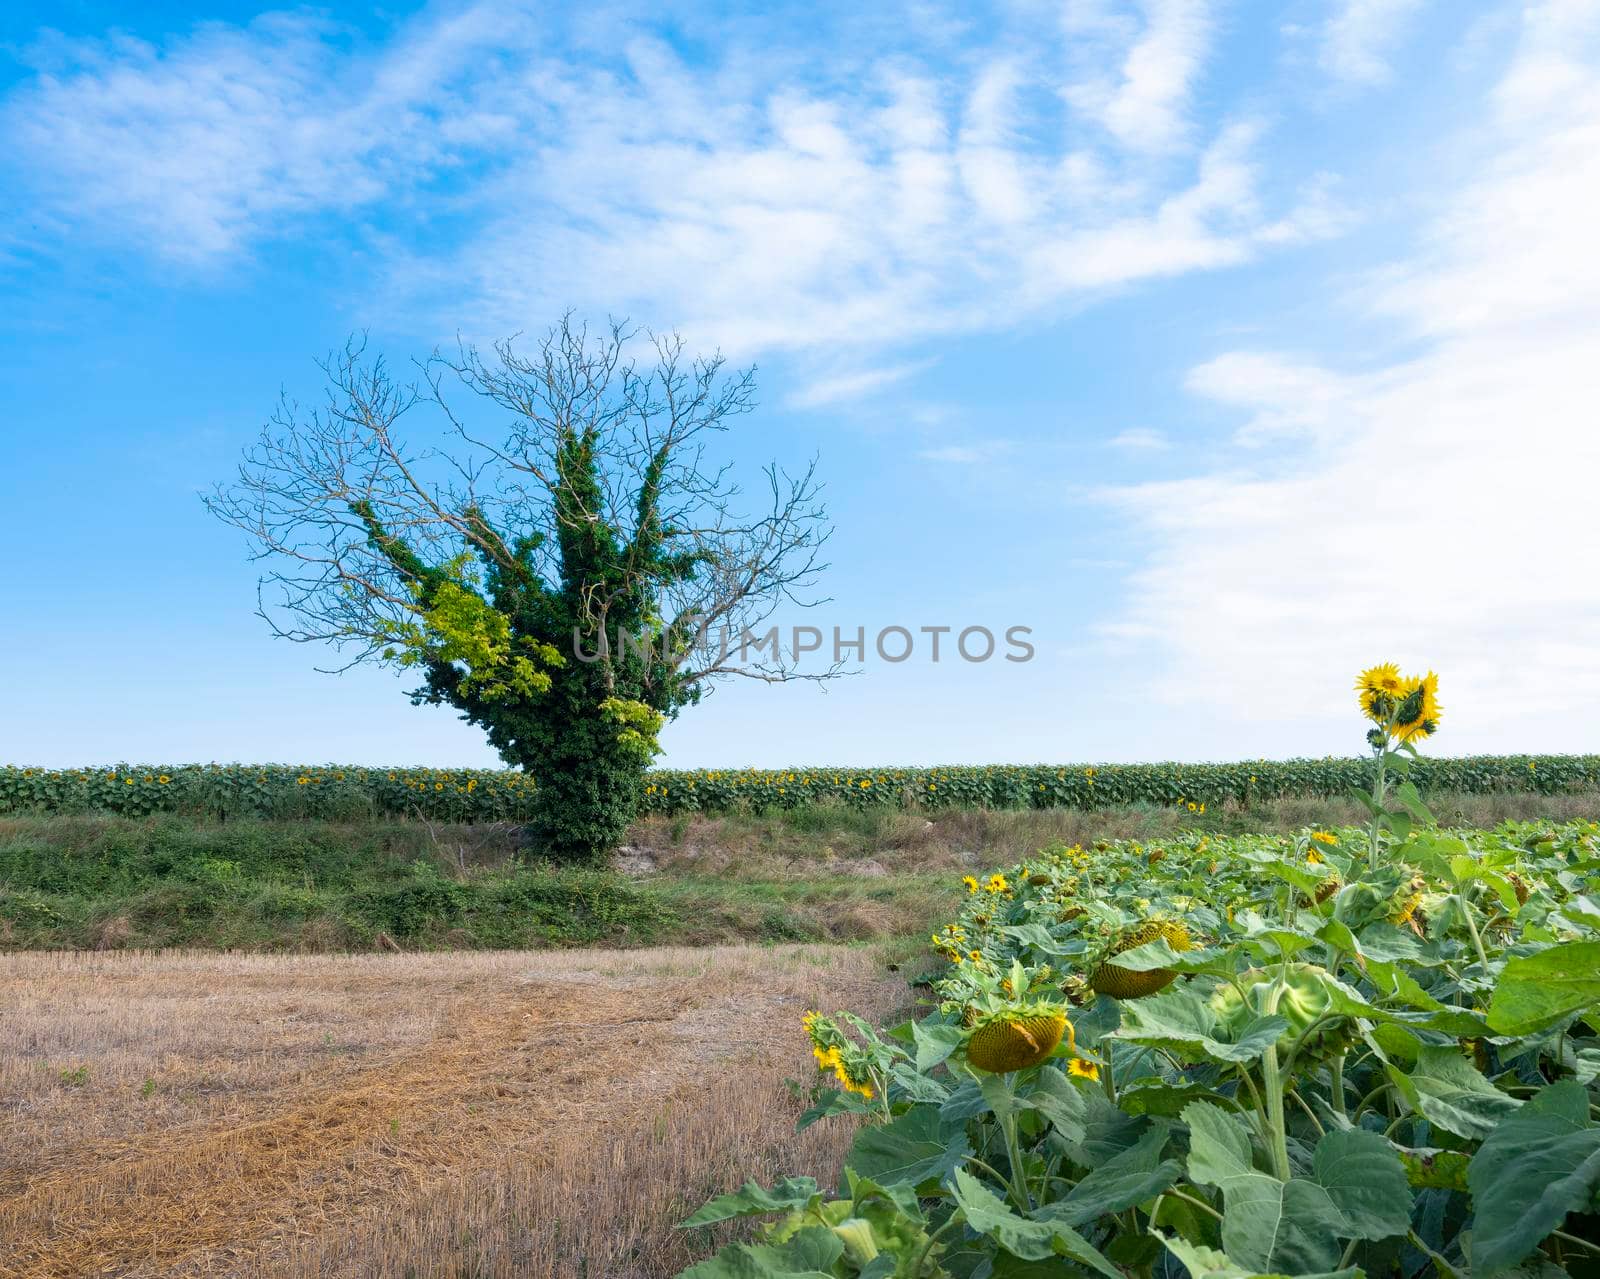 sunflower fields and tree under blue summer sky in france between tours and angers in Parc naturel regional Loire-Anjou-Touraine by ahavelaar